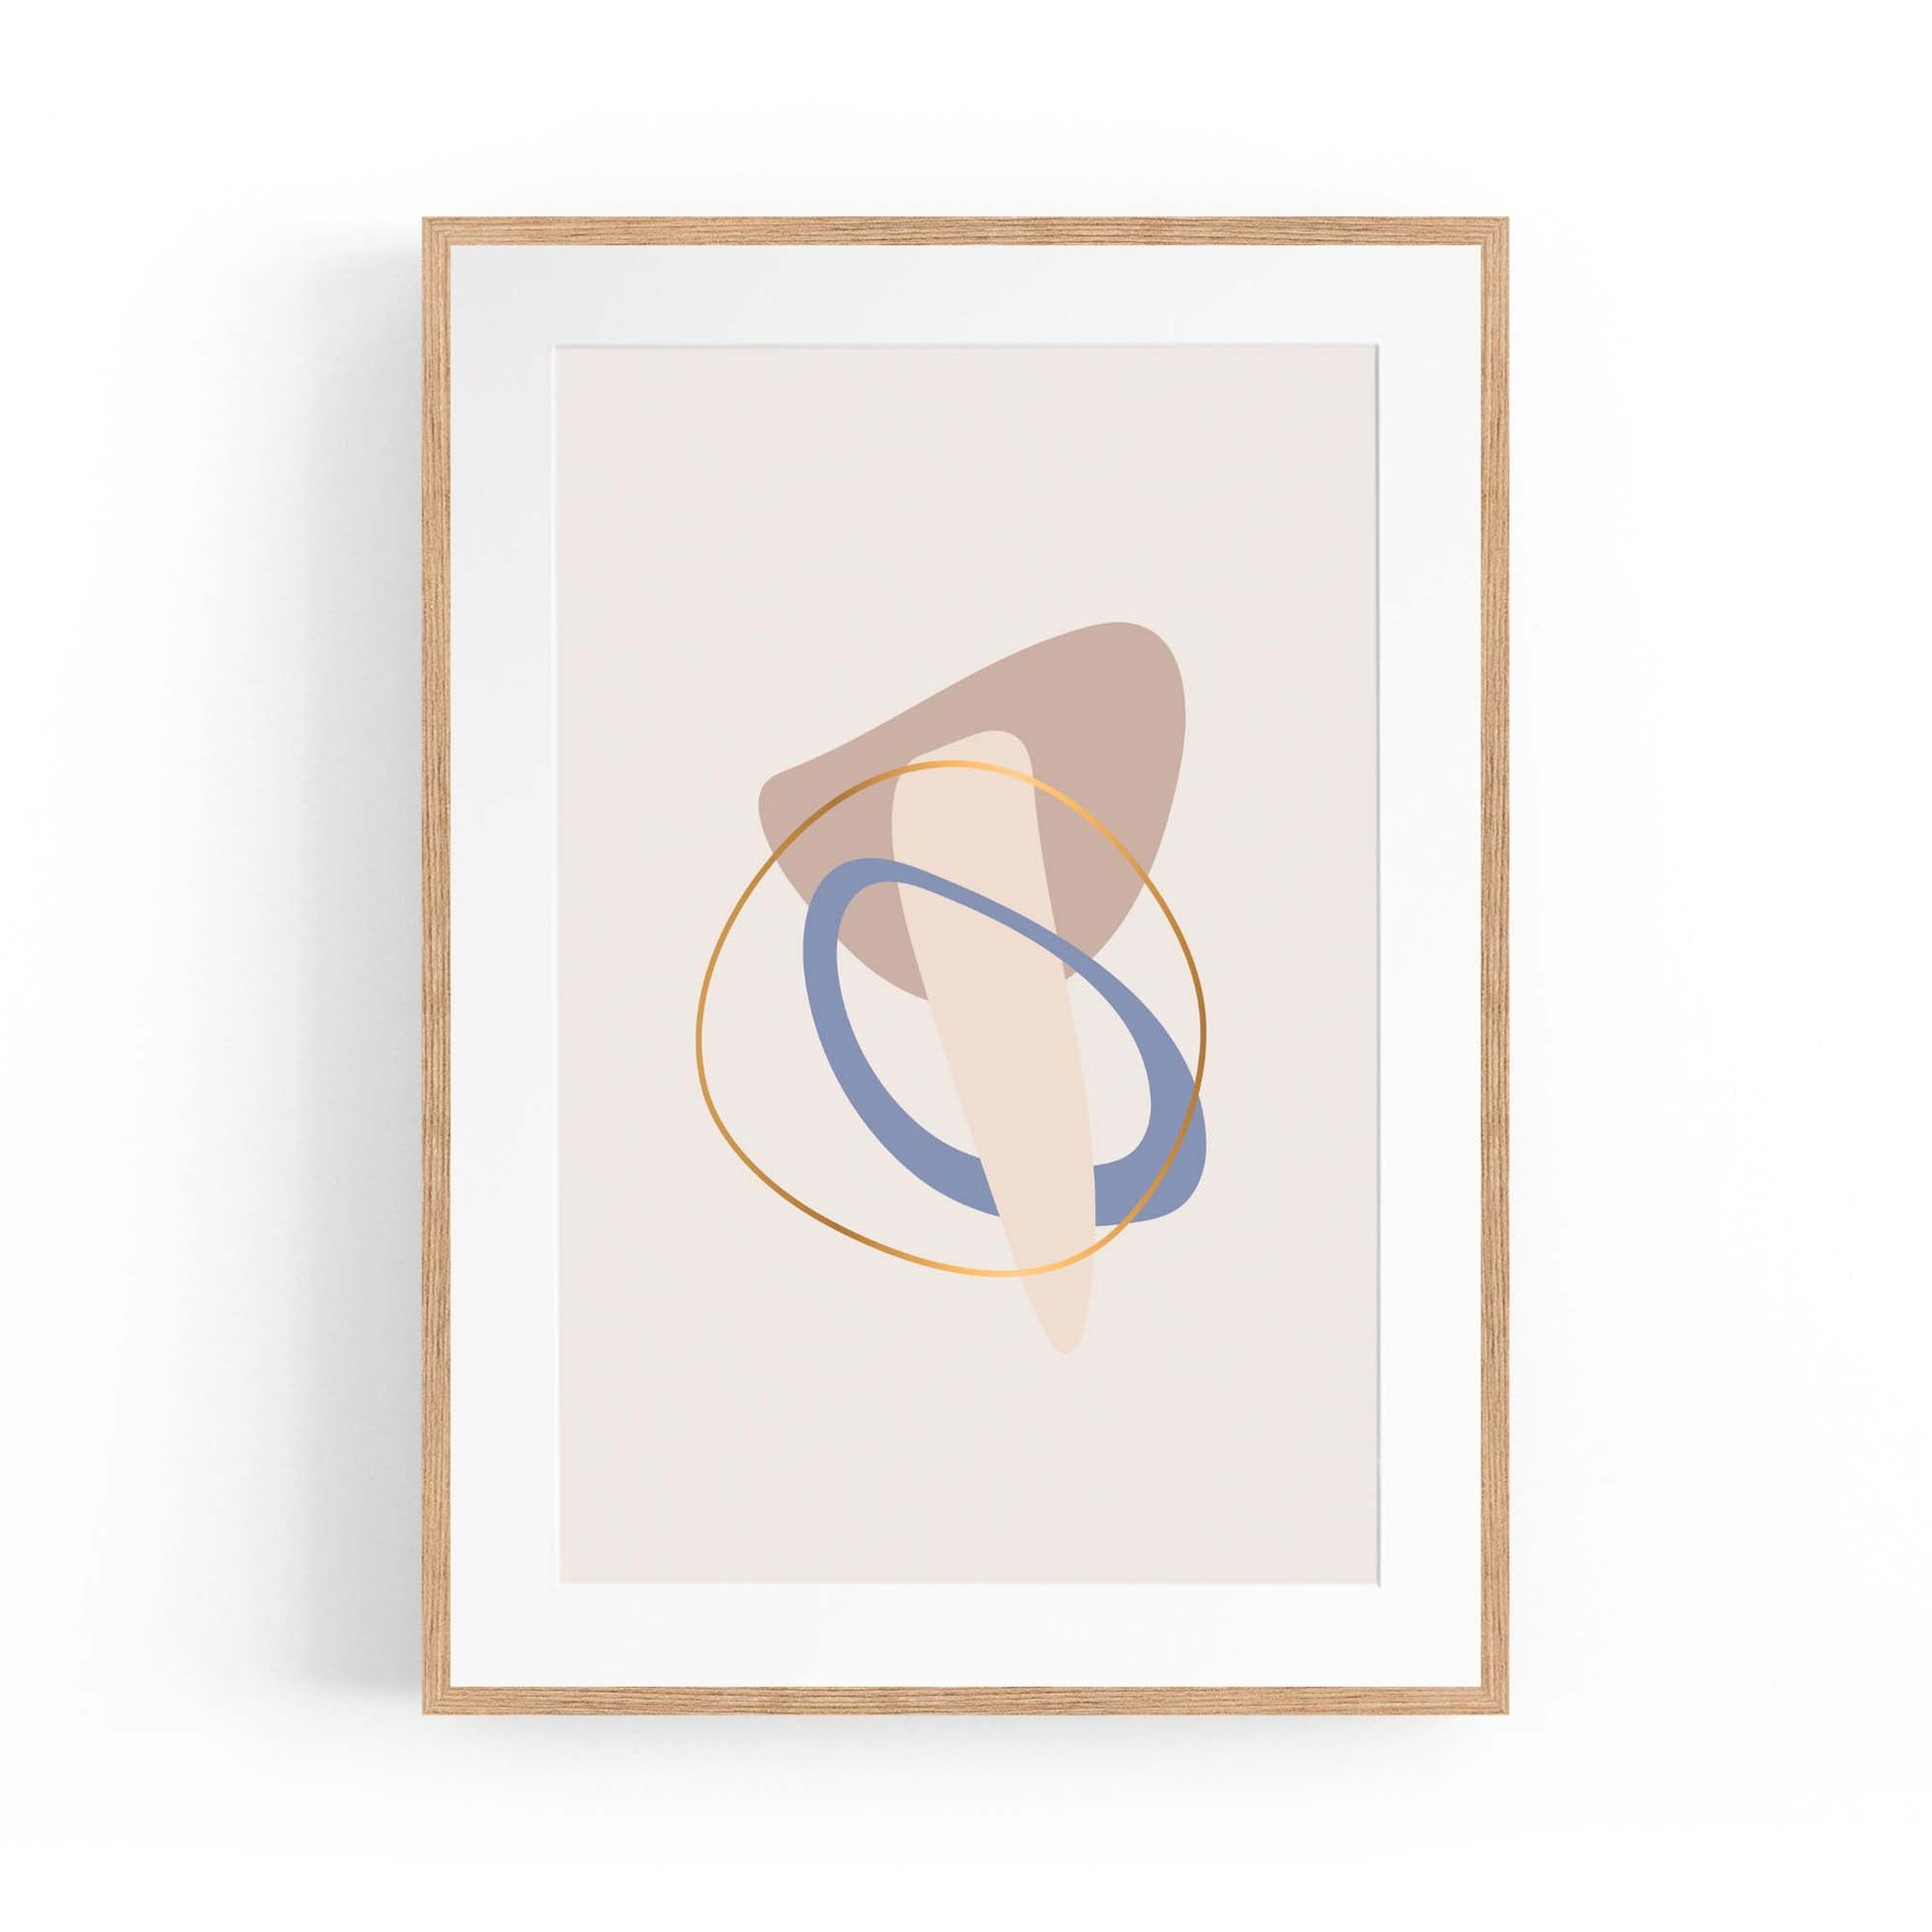 Pale Abstract Shapes Wall Art #3 - The Affordable Art Company